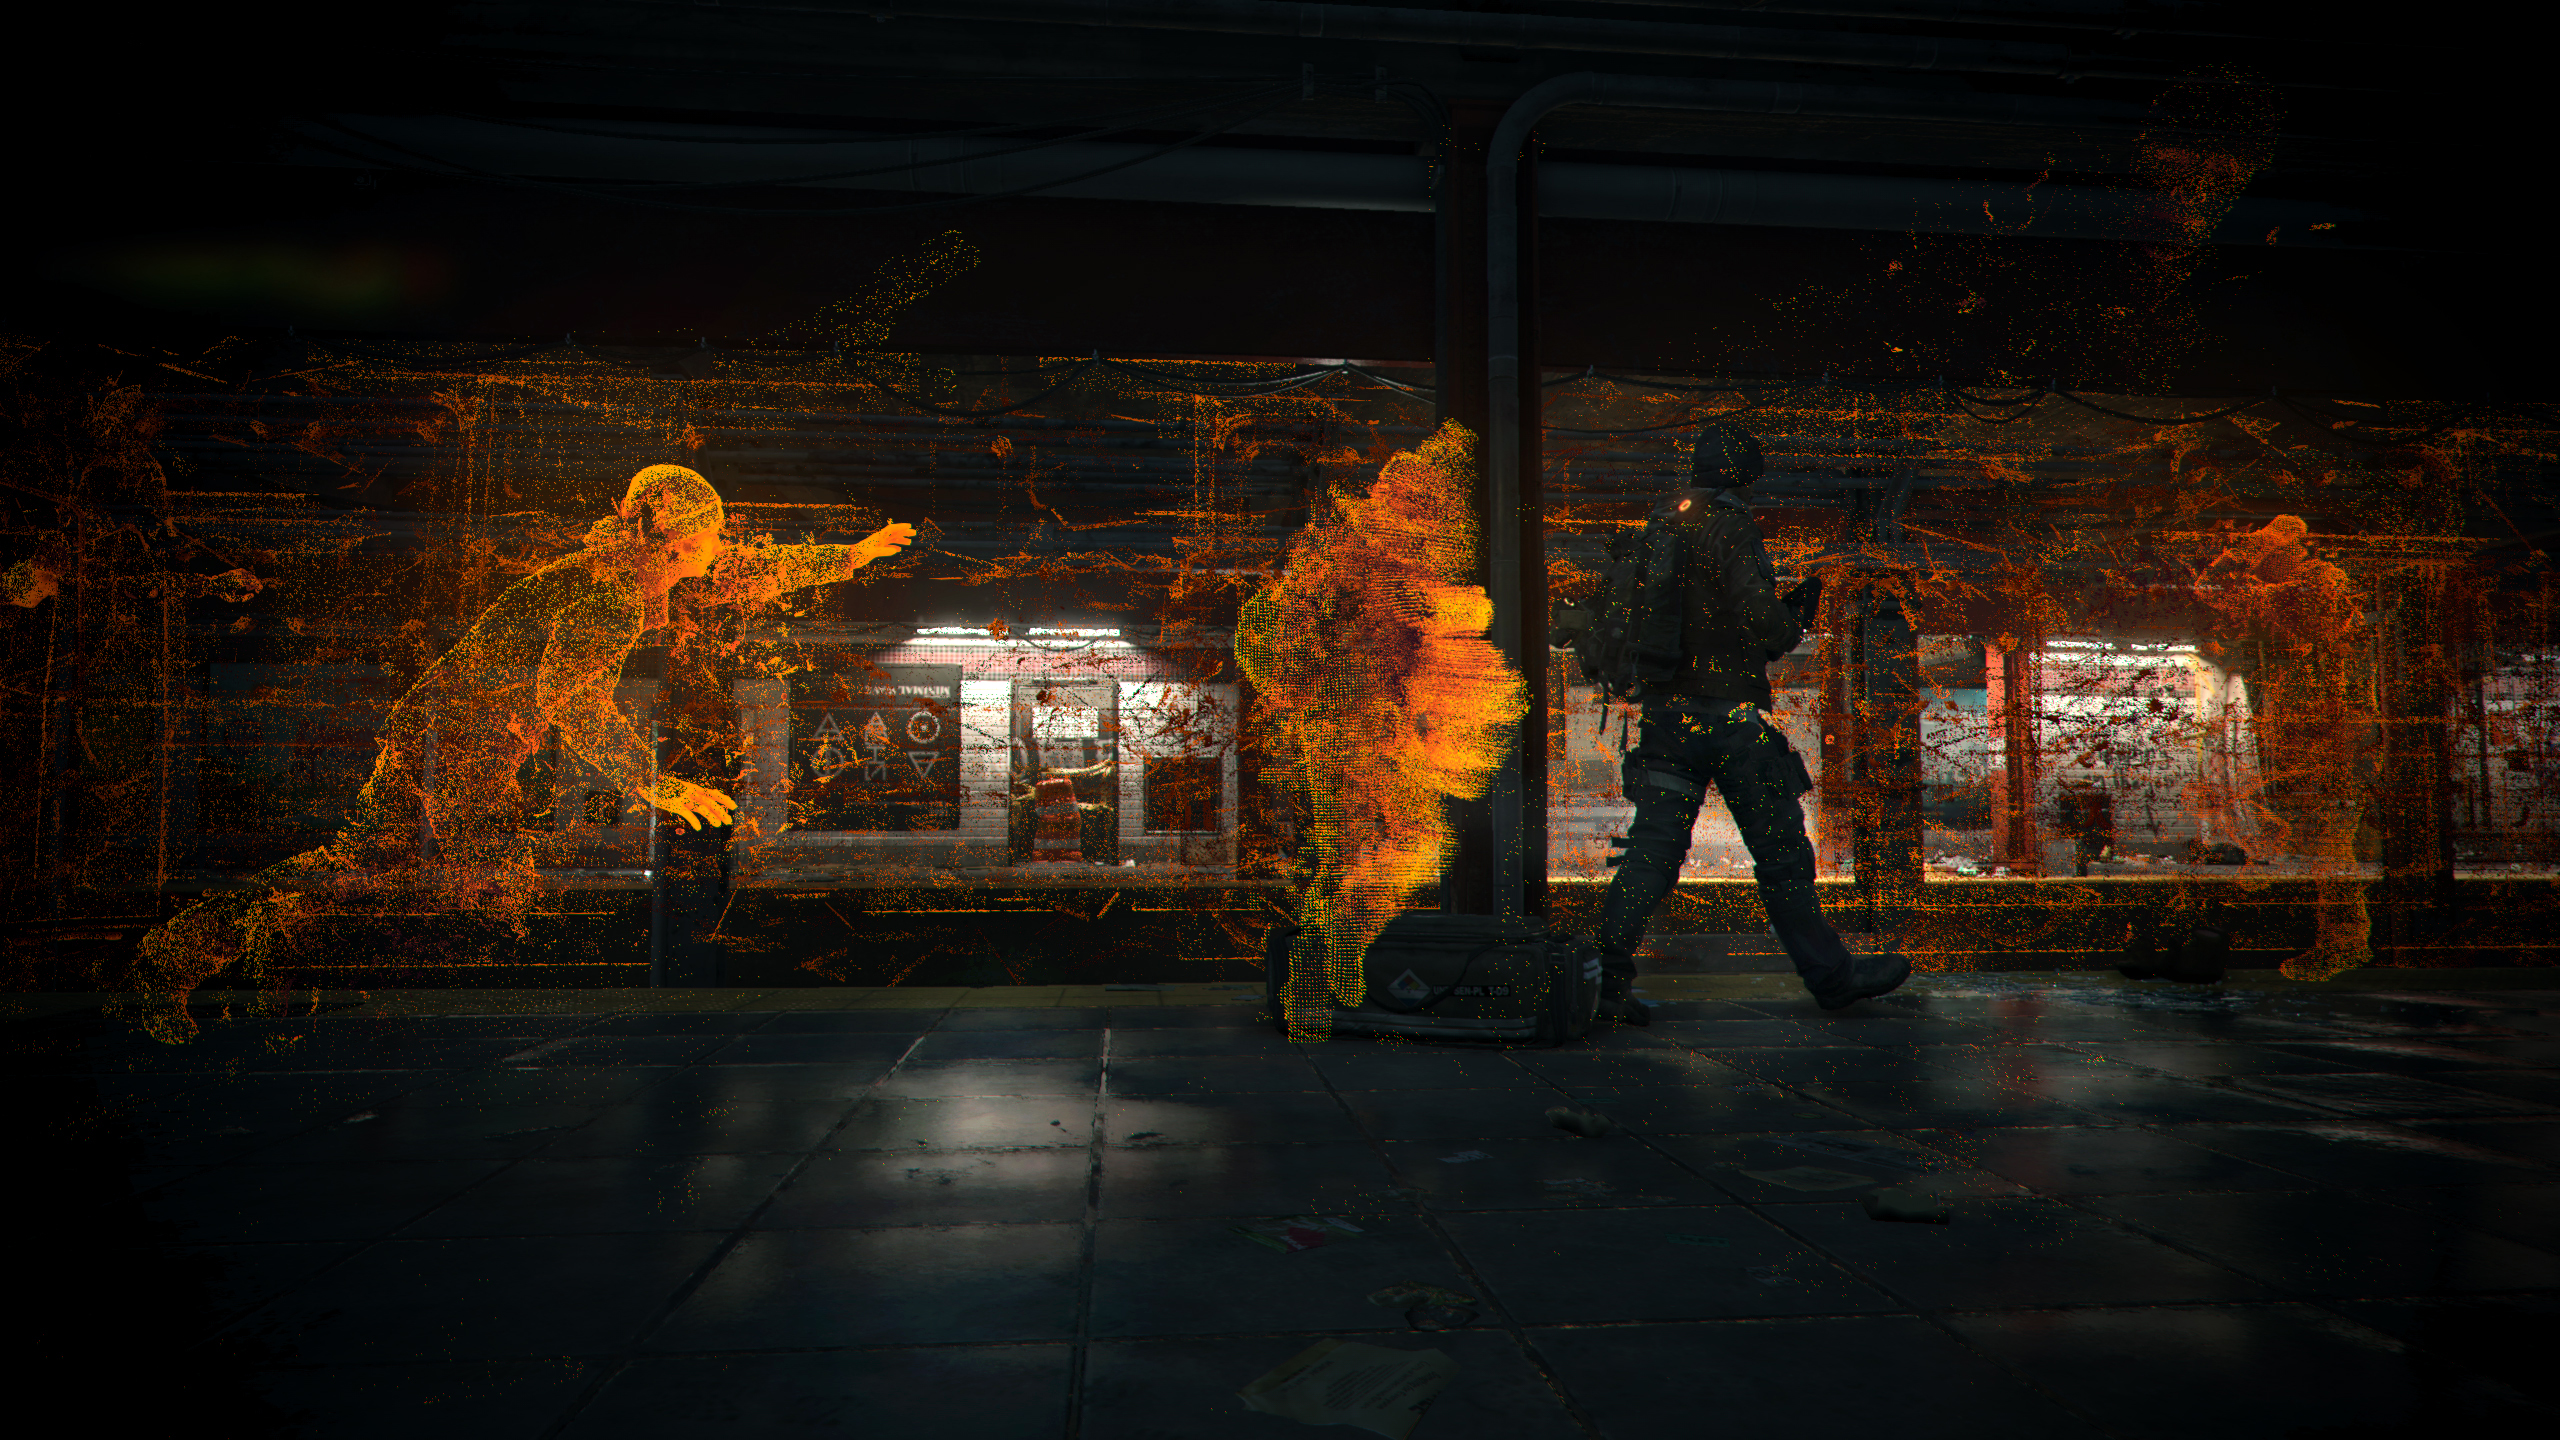 Tom Clancy's The Division screenshot 5779